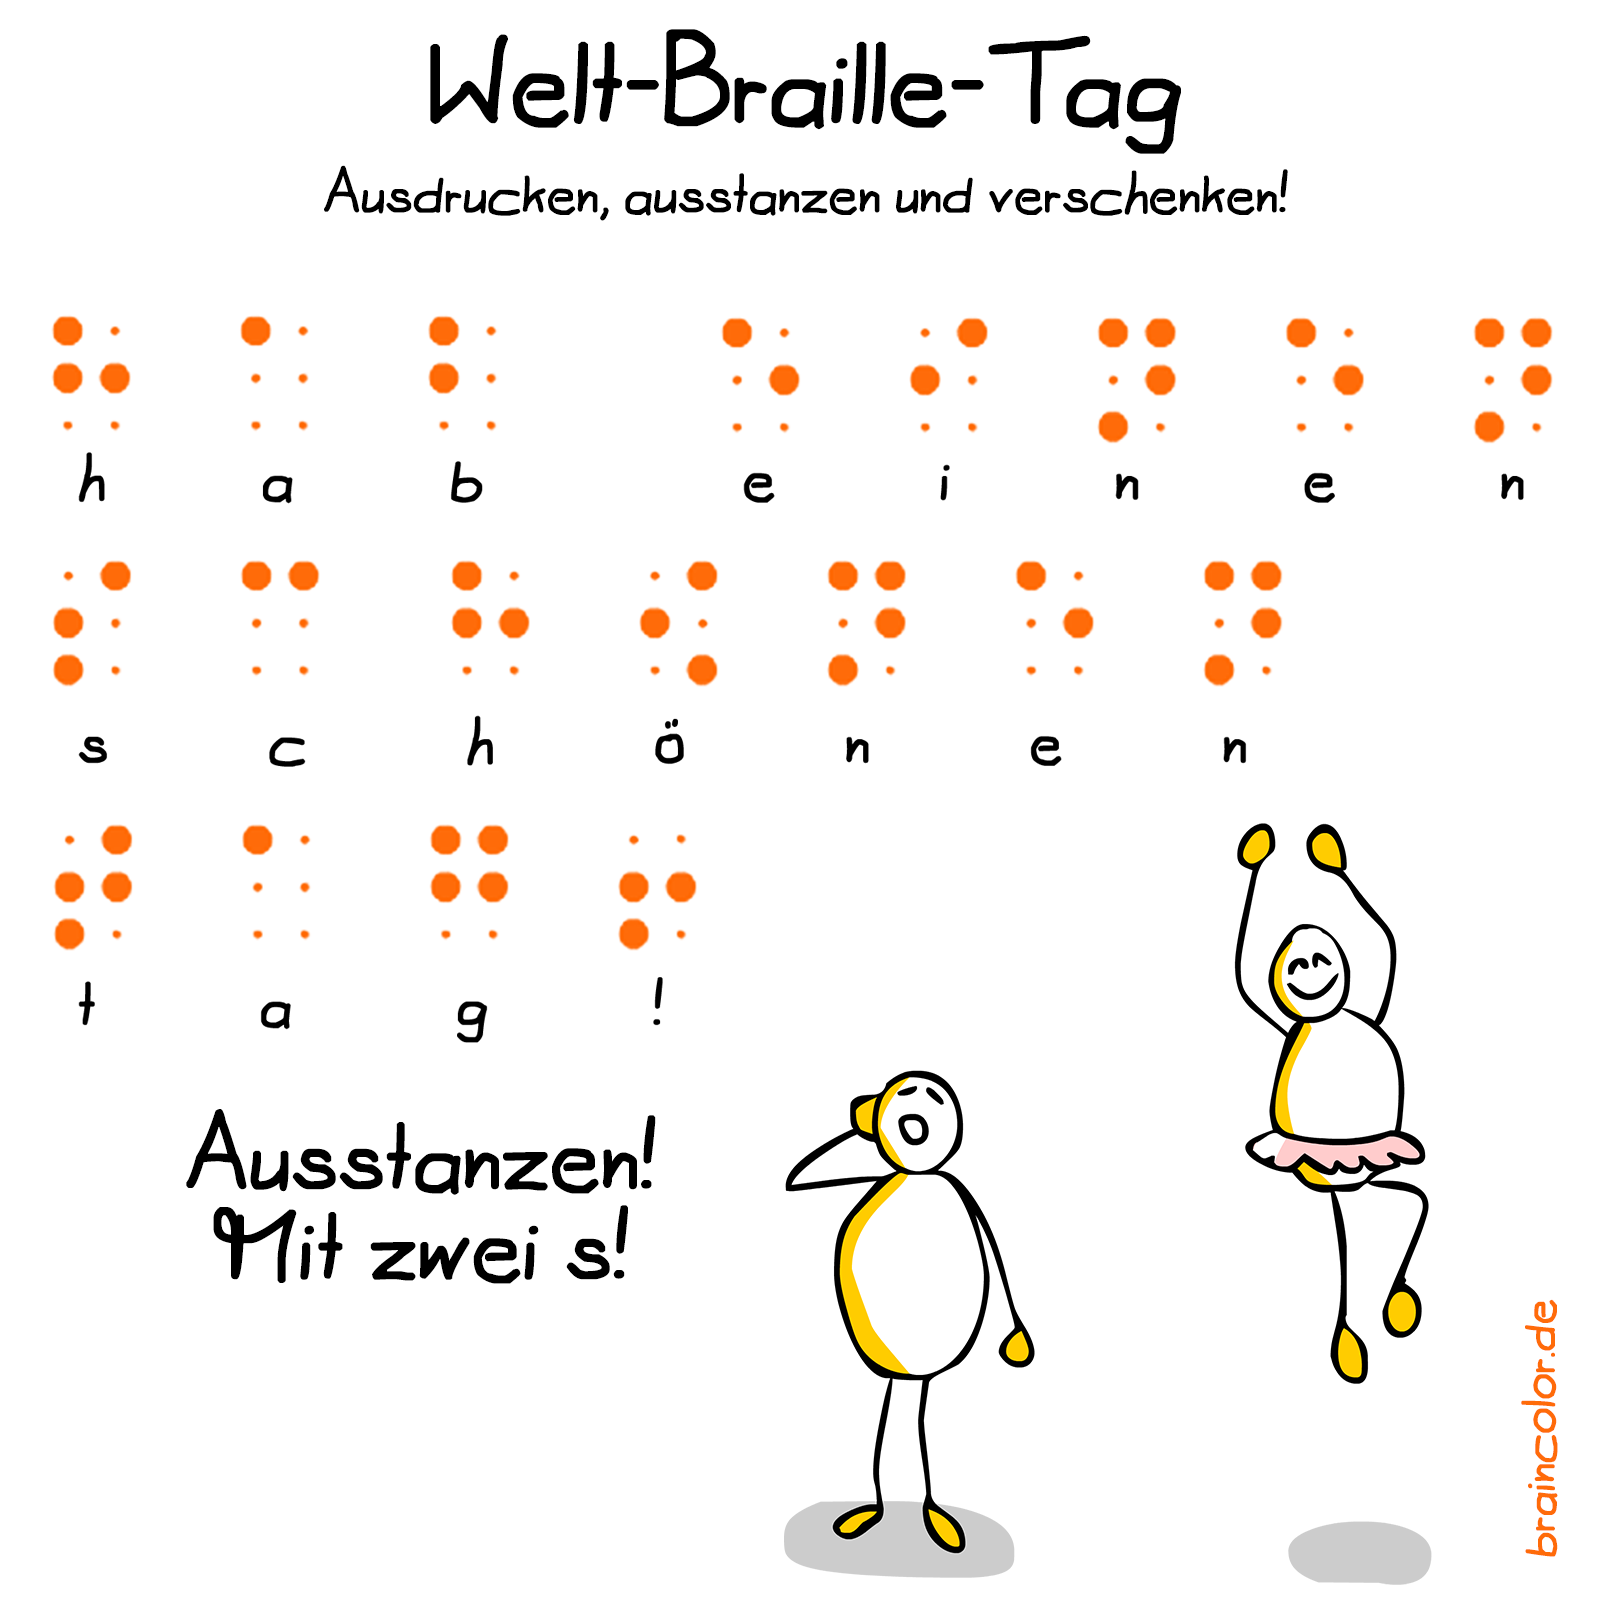 welt-braille-tag